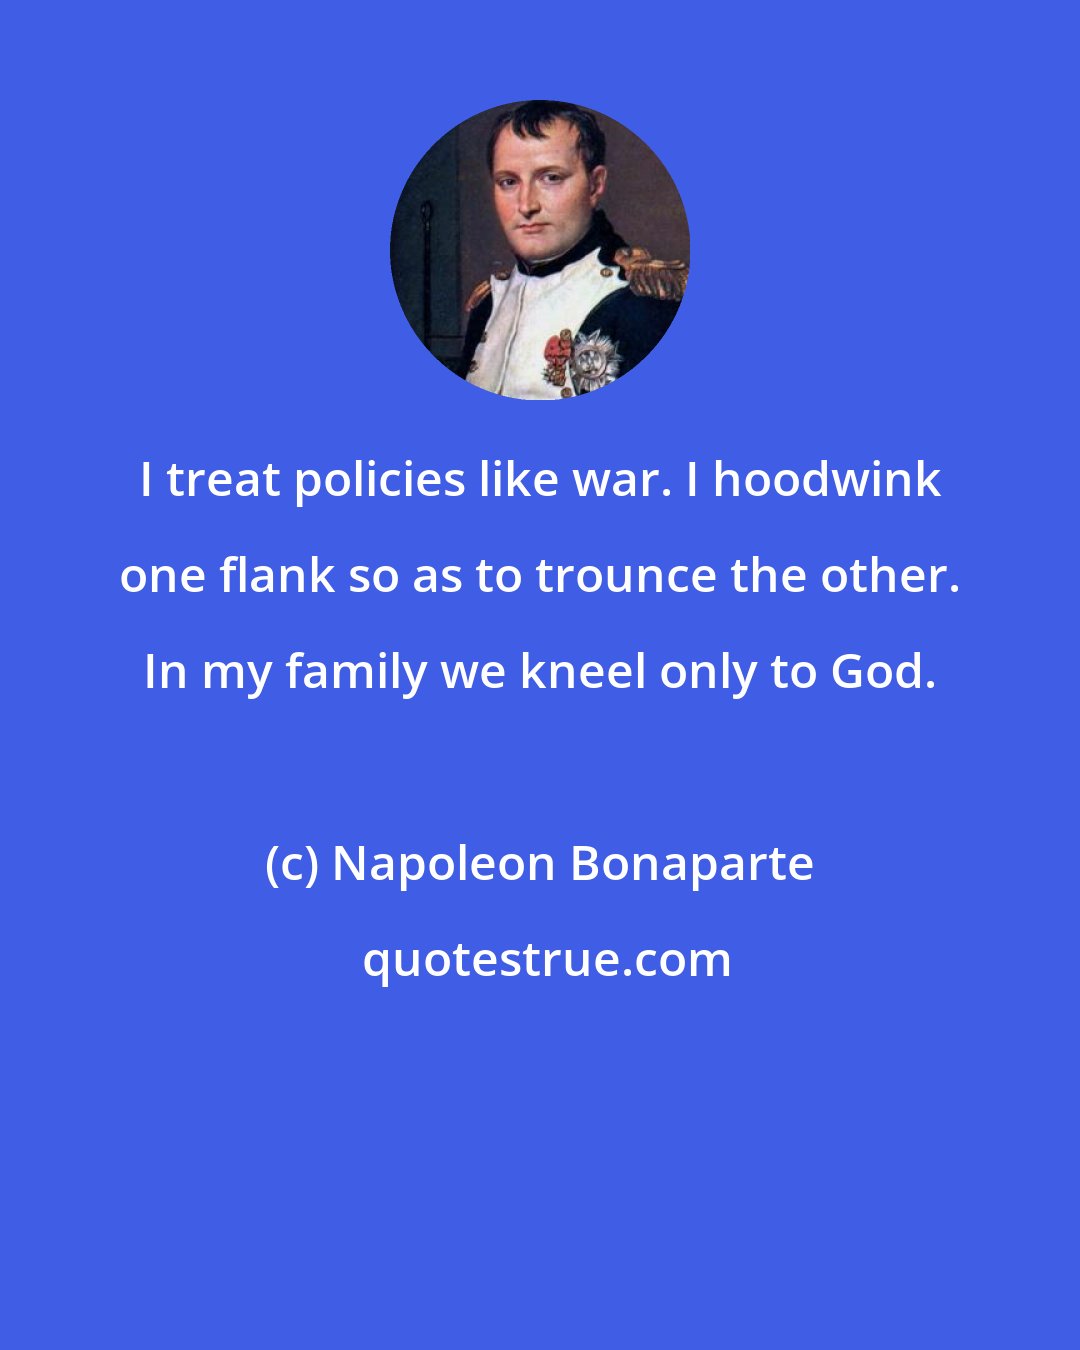 Napoleon Bonaparte: I treat policies like war. I hoodwink one flank so as to trounce the other. In my family we kneel only to God.